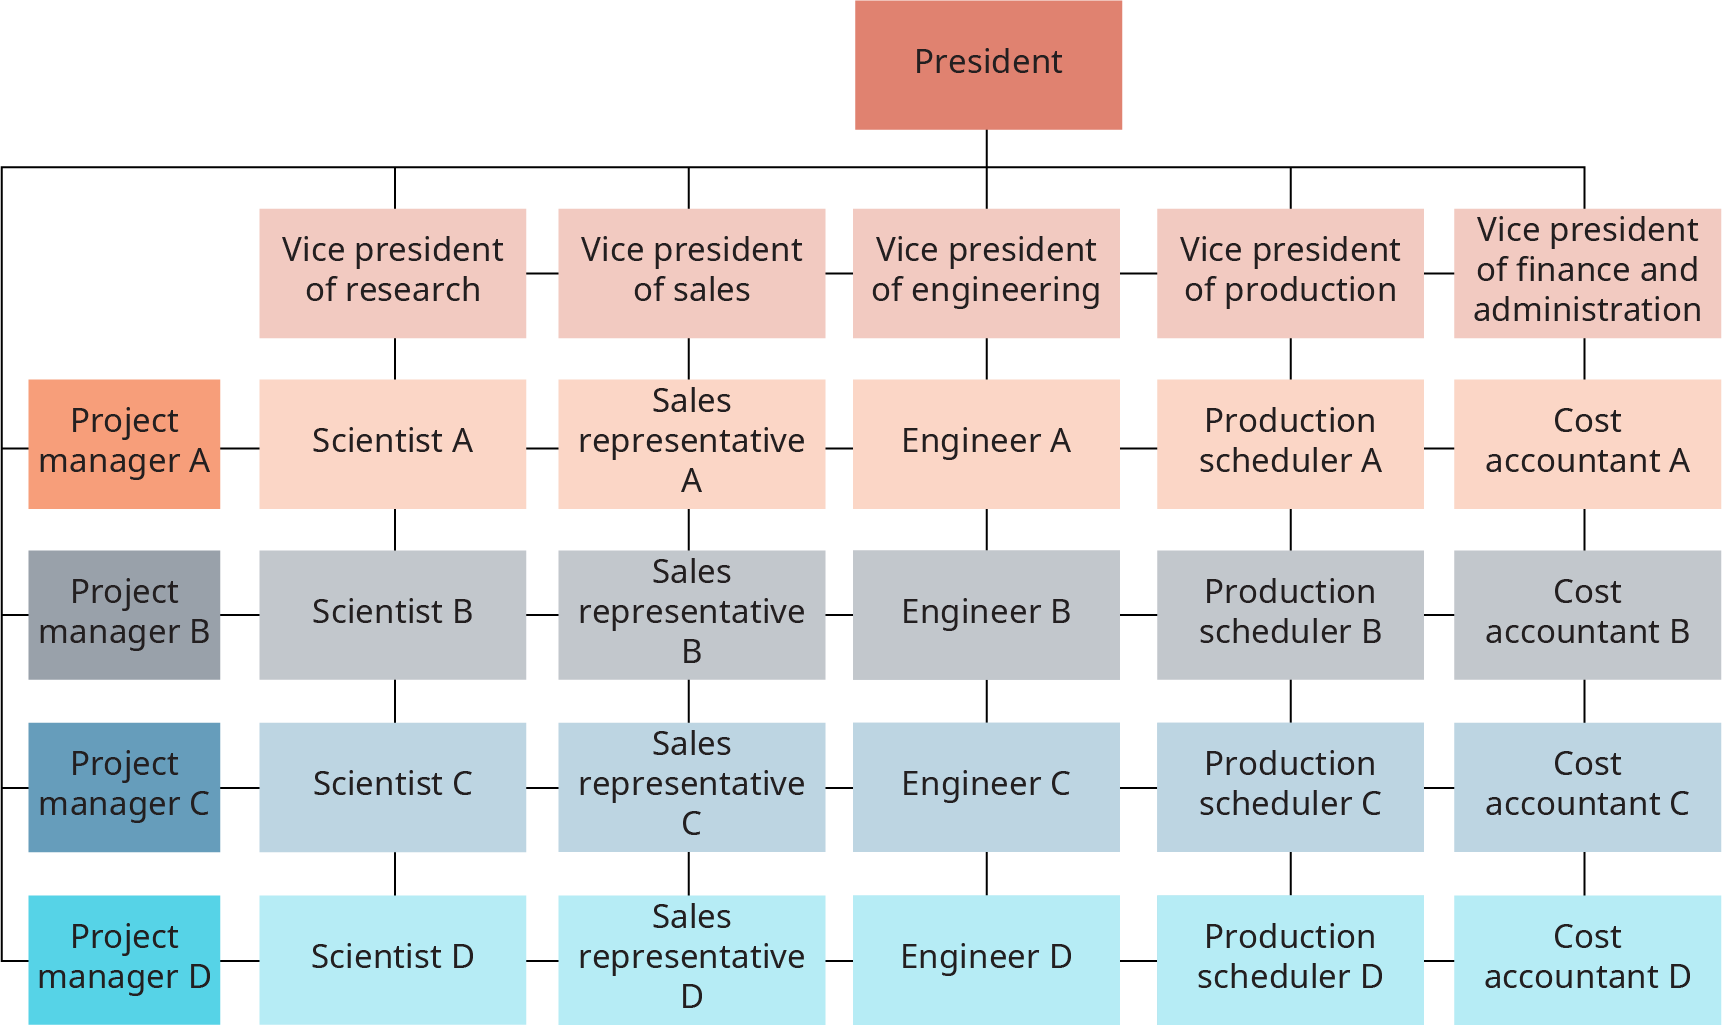 The matrix is made up of 5 columns and 4 rows. At the top of the matrix is the president; the president has lines extending to each column and row. The rows, from top to bottom, are labeled, Project manager A and Project manager B, and Project manager C, and Project manager D. From left to right, the columns are labeled Vice president of research and Vice president of sales, and Vice president of engineering, and Vice president of production, and Vice president of finance and administration. From left to right, the cells in the first row read, Scientist A, and Sales Representative A, and Engineer A, and Production Scheduler A, and Cost accountant A. Each row has this same construction, with scientist under v p of research; and sales rep under v p of sales, and engineer under v p of engineering, and production scheduler under v p of production, and cost accountant under v p of finance and admin.